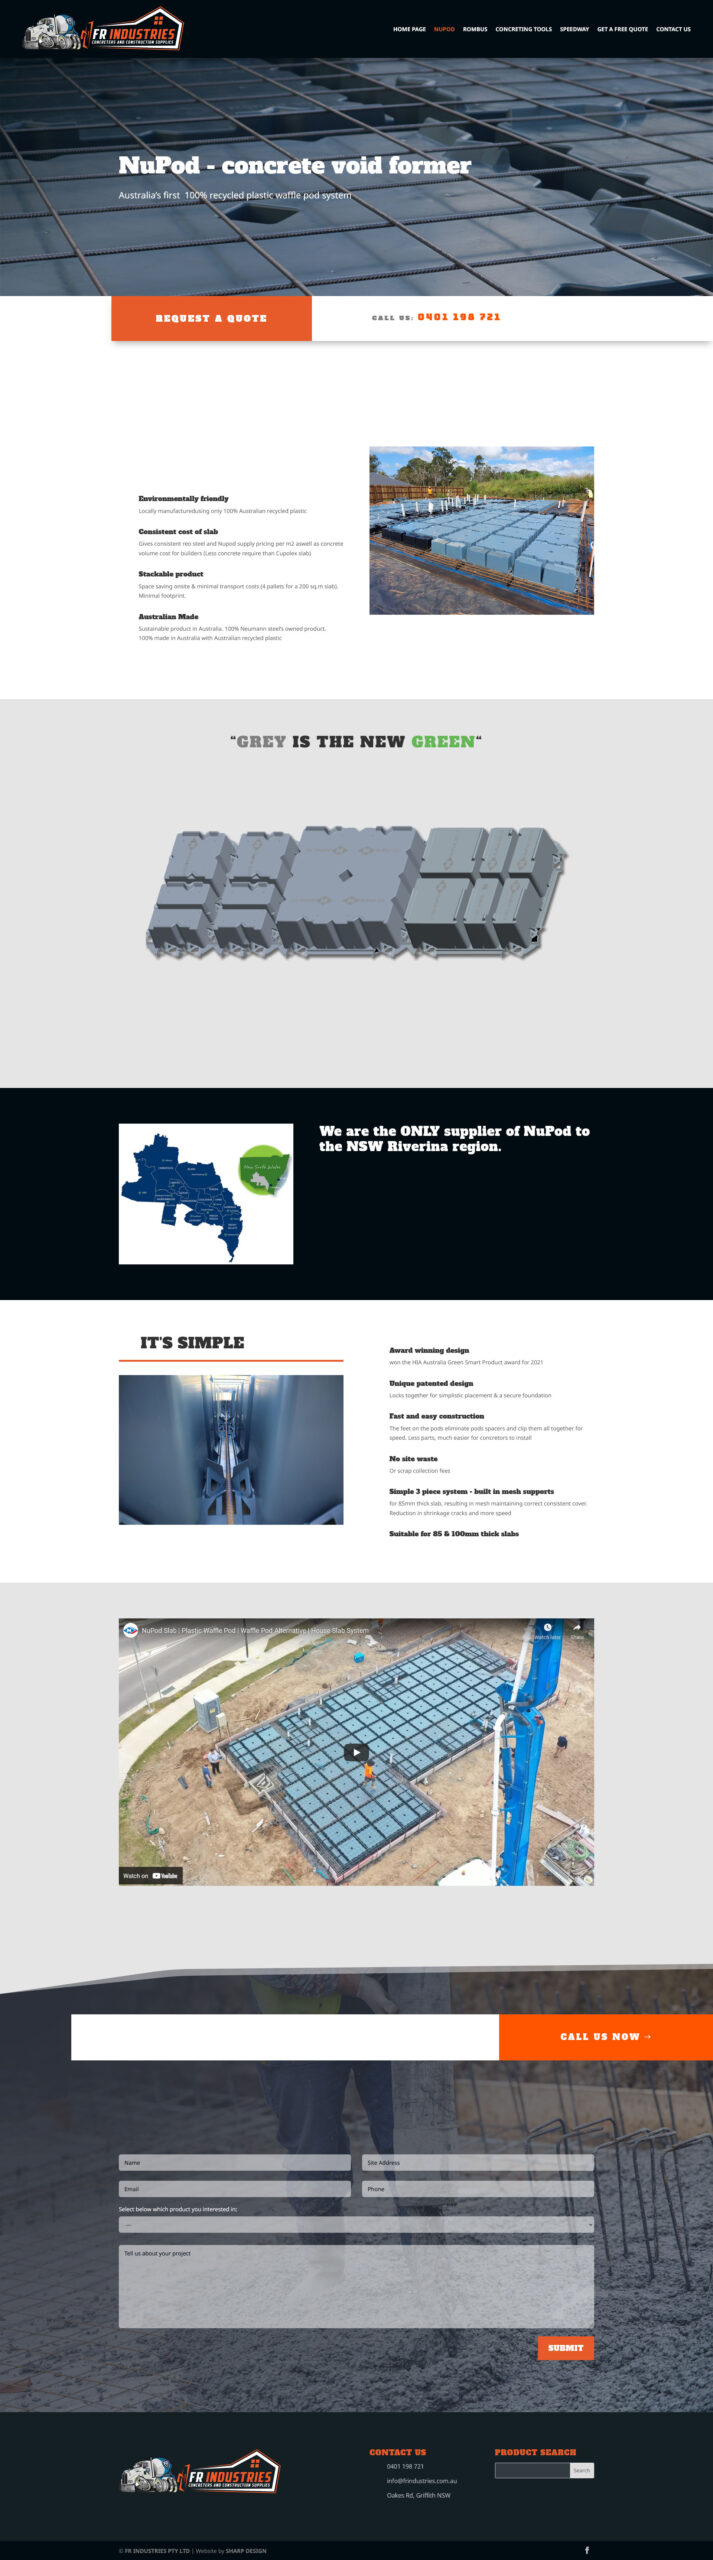 FR Industries product page